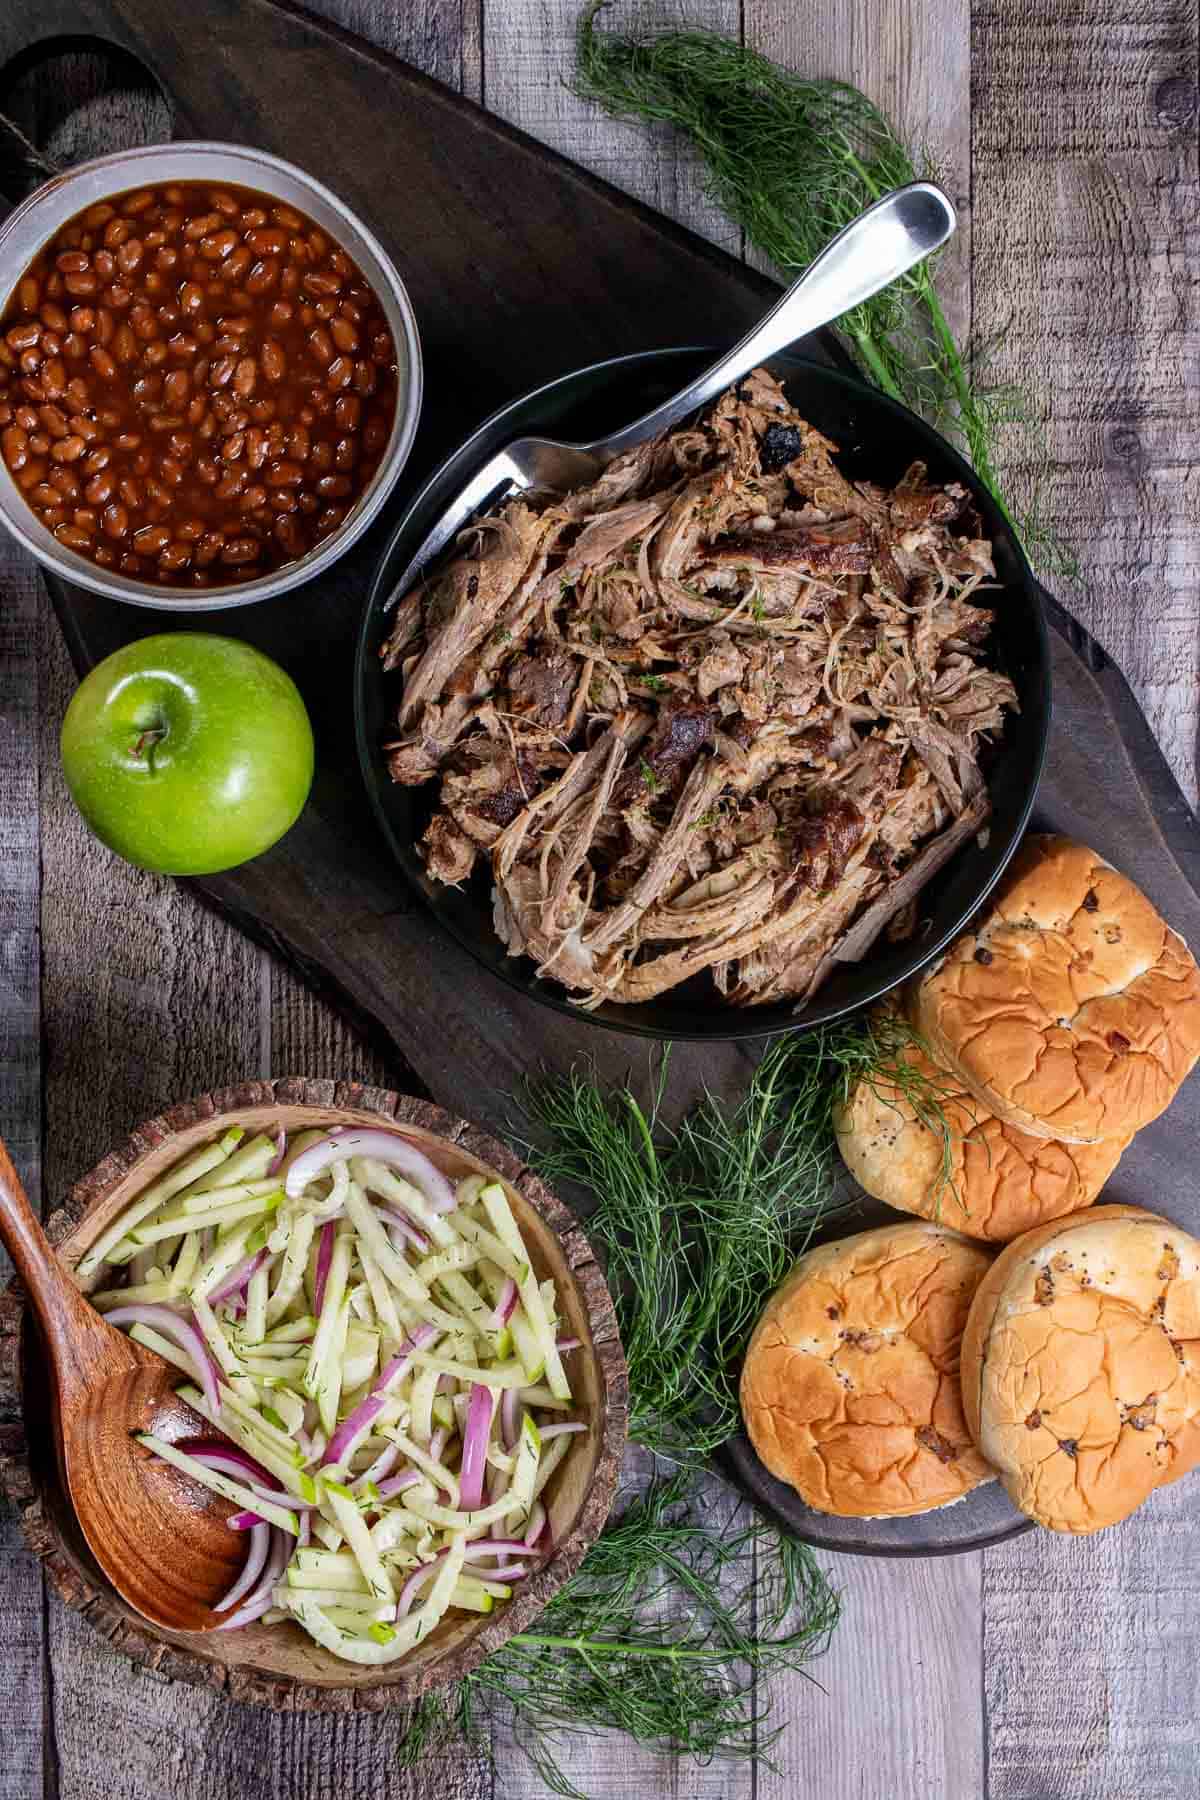 Overhead view of cider braised pork shoulder, served with onion buns, fennel apple slaw, and baked beans.